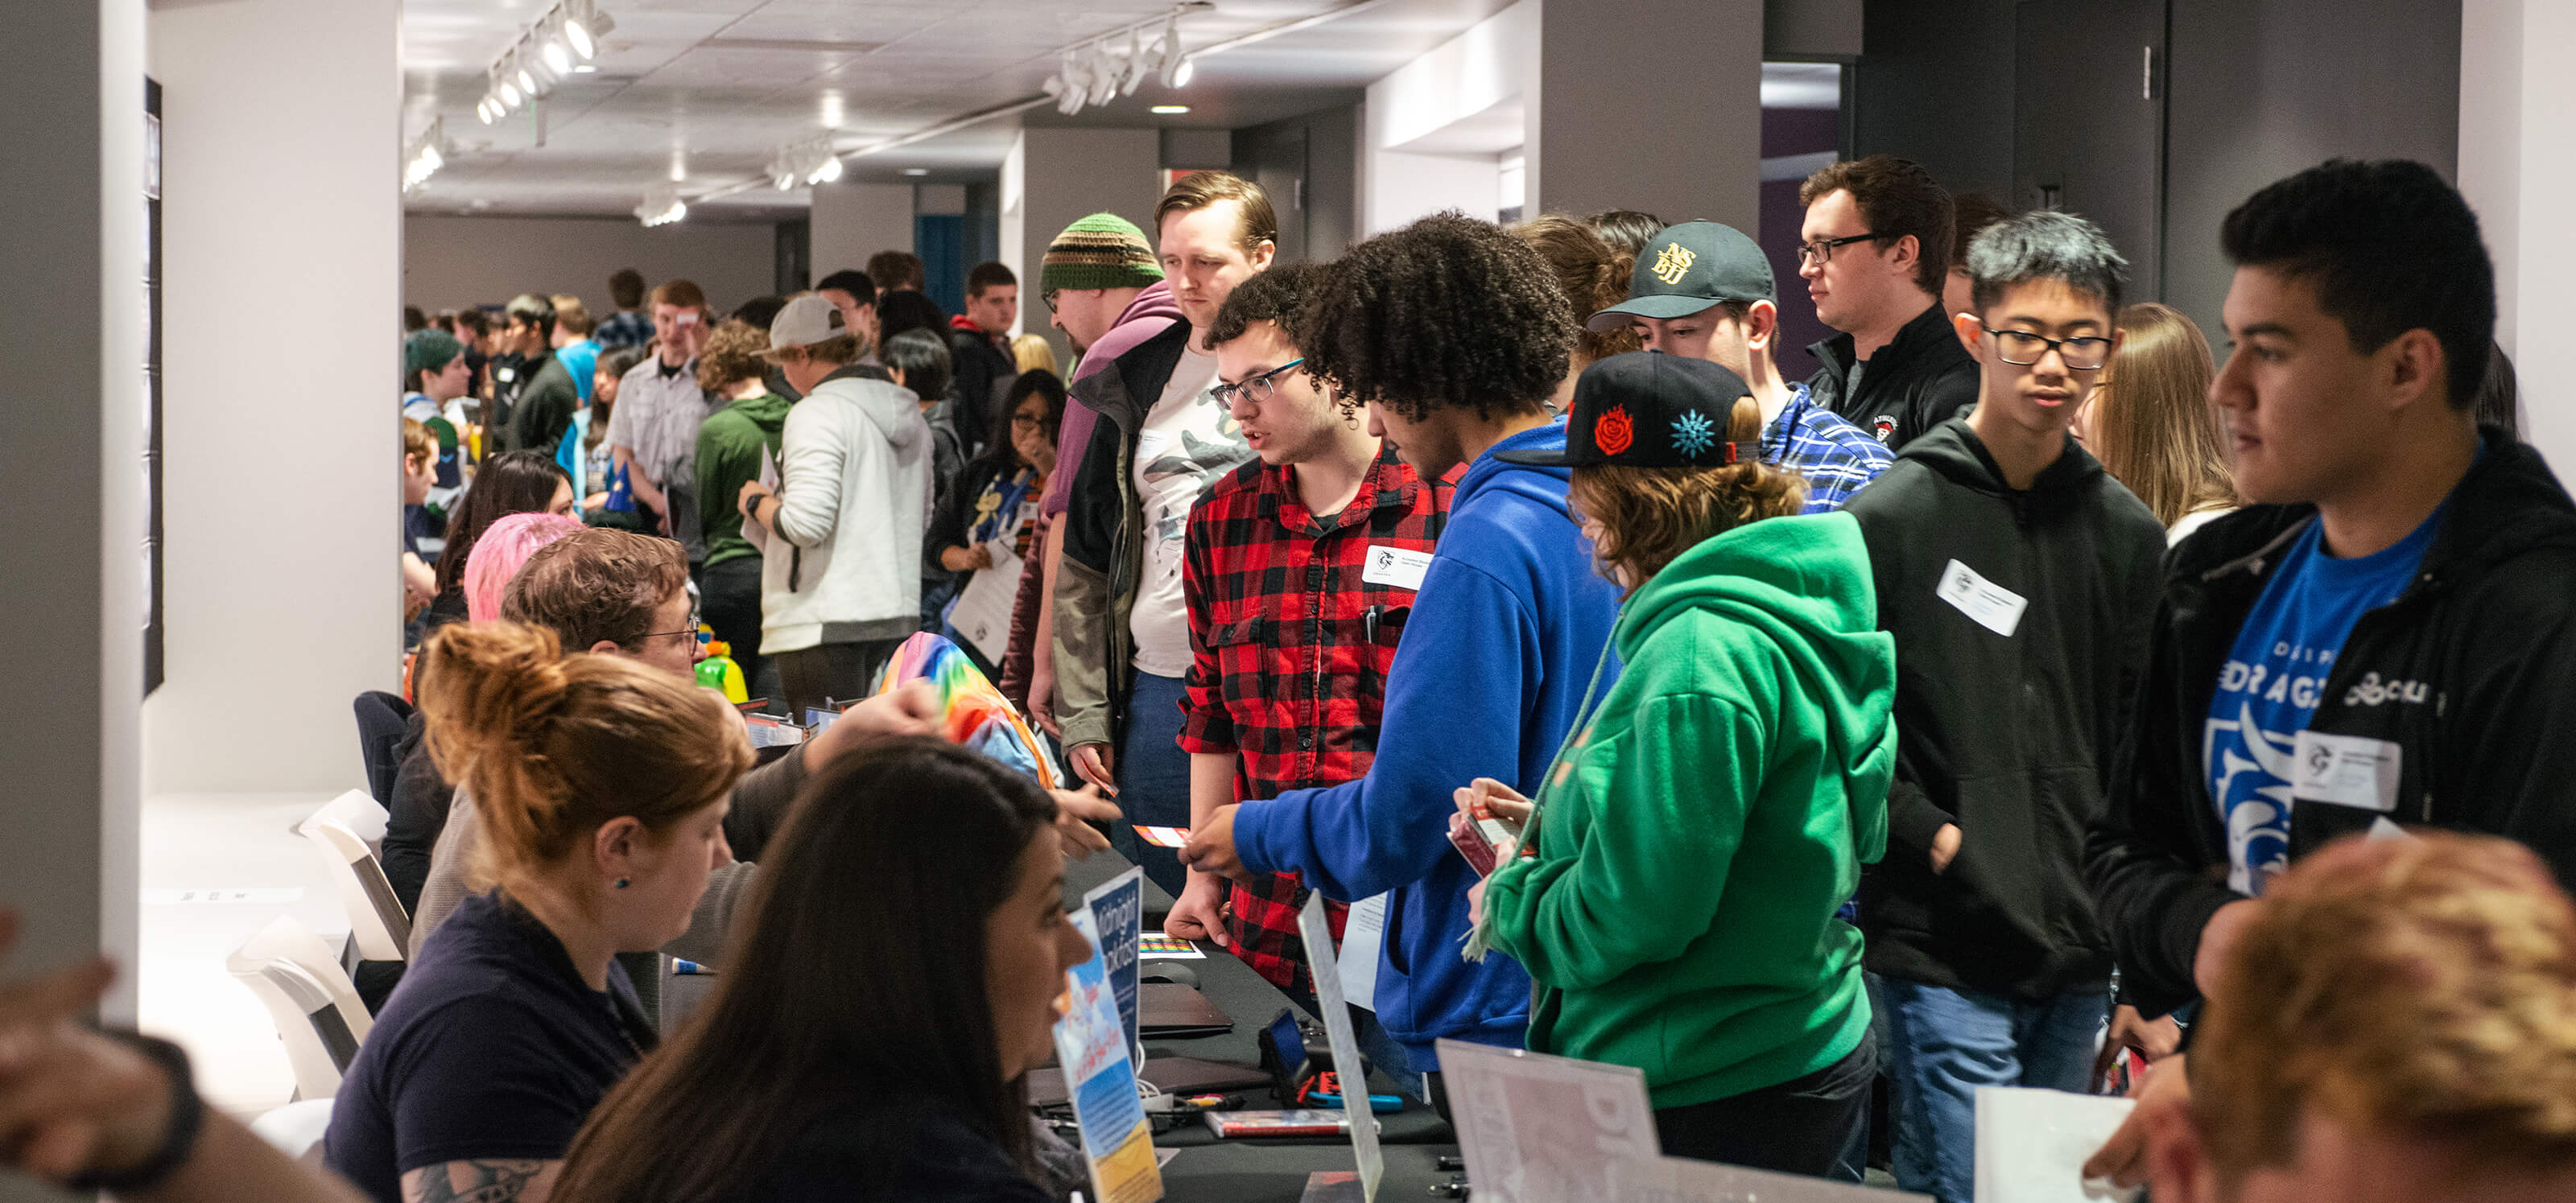 Students gather for the annual DigiPen Club Fair